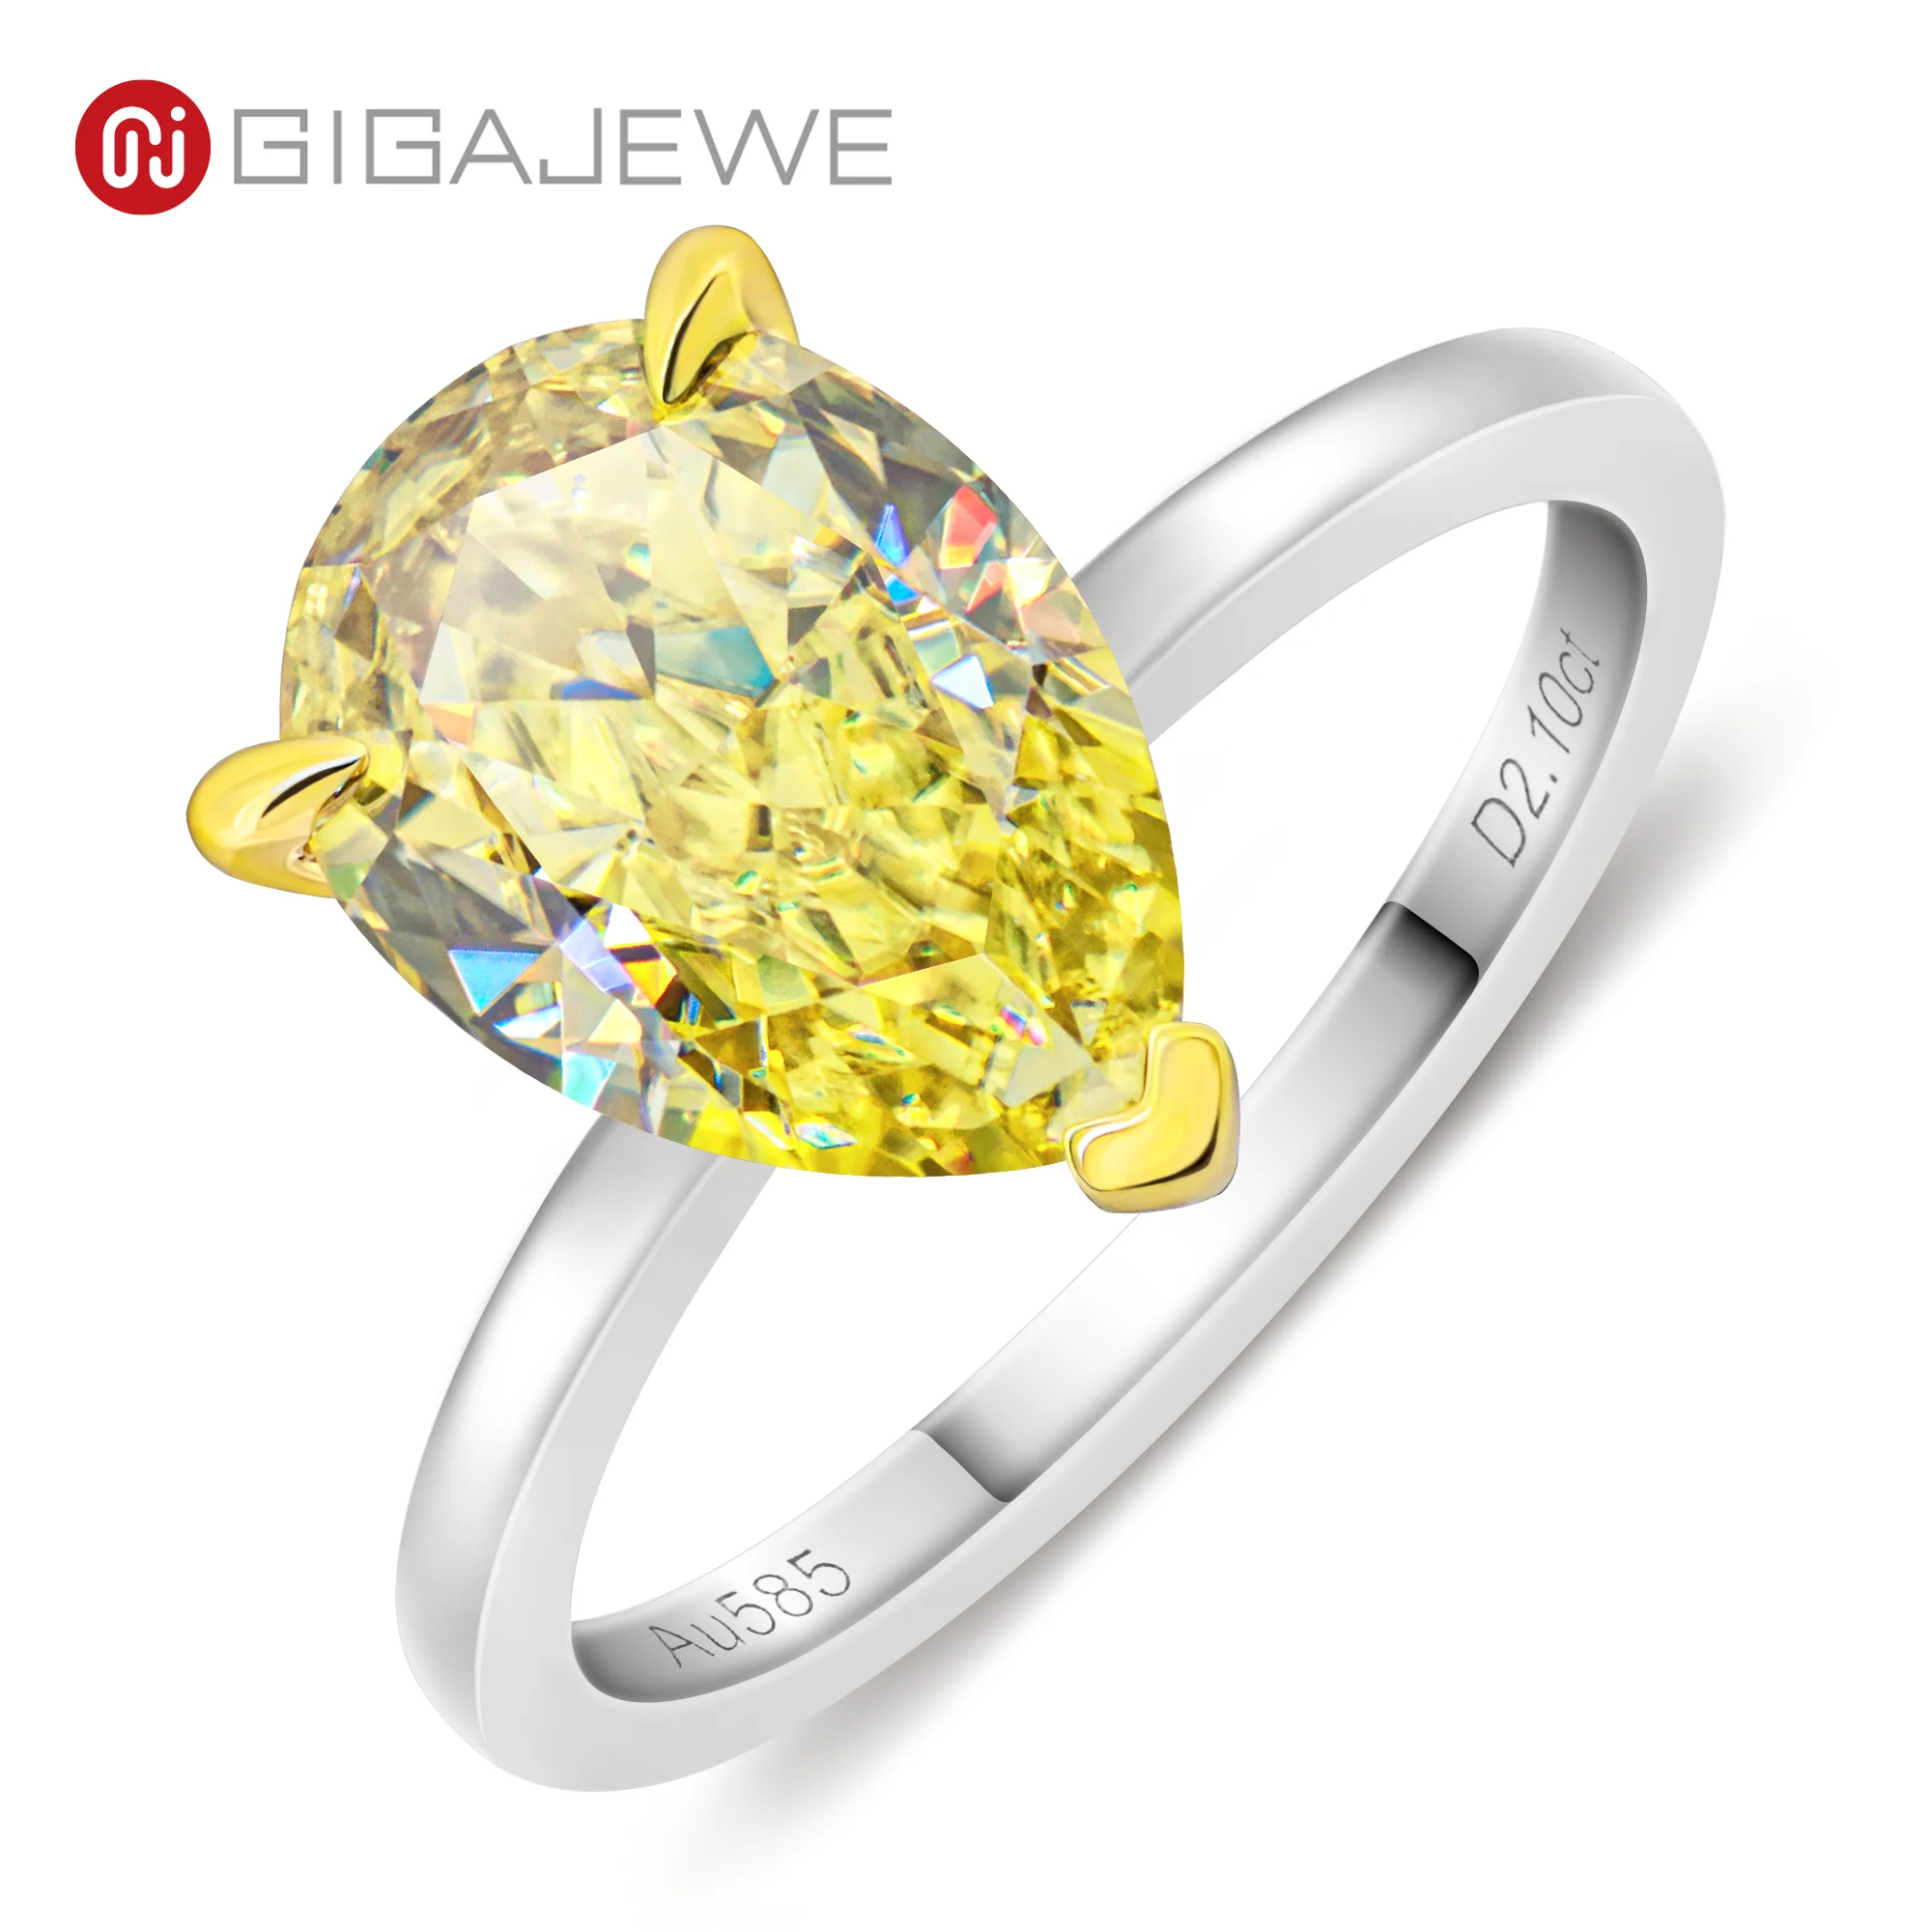 

GIGAJEWE 2.0ct 7x10mm Vivid Yellow Color Moissanite VVS1 Crushed Ice Pear Cut 18K White Gold Ring Jewelry Woman Girlfriend Gift